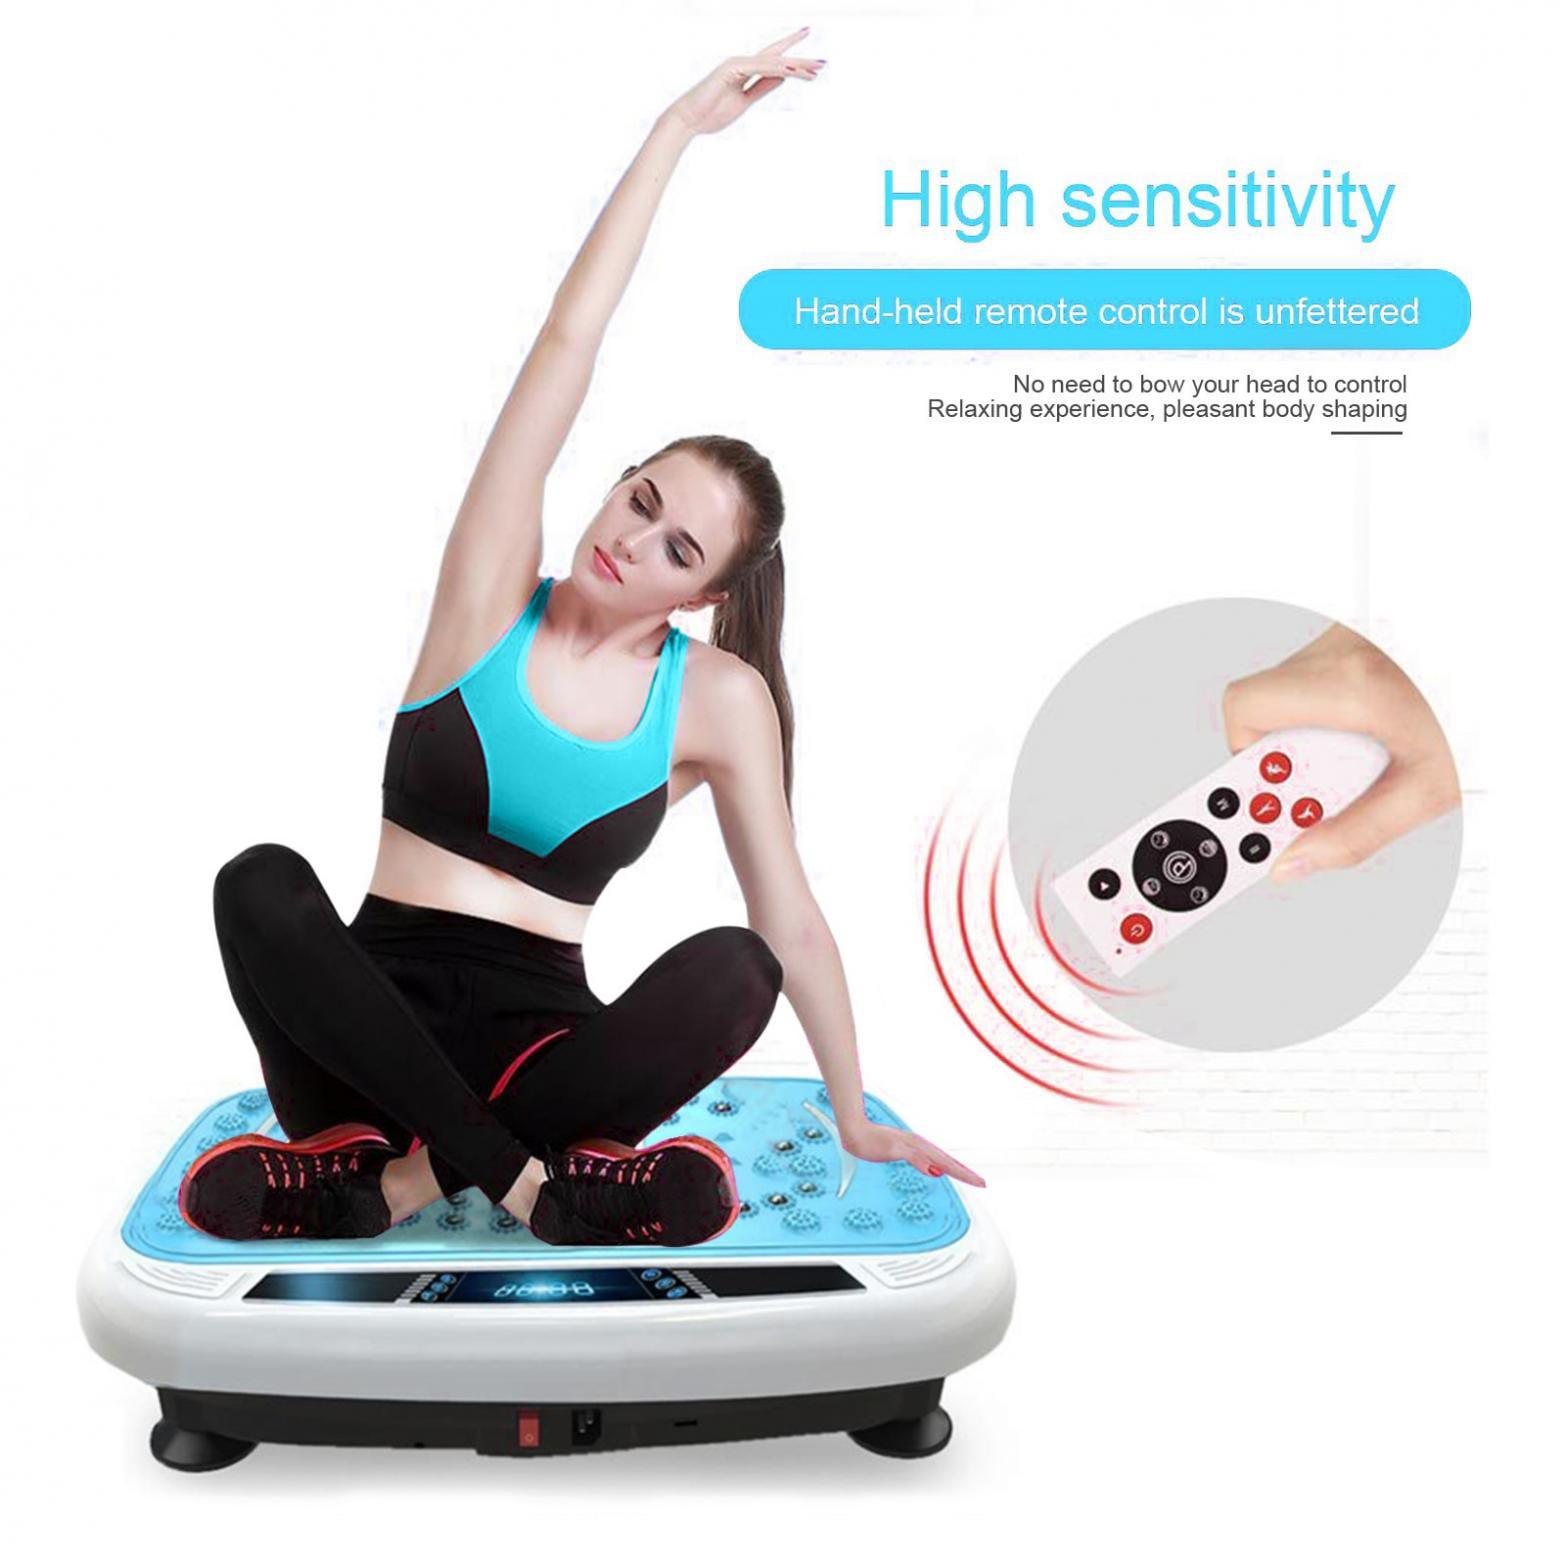 Whole Body Workout Vibration Fitness Platform w/Loop Bands Home Training Equipment CaiJi Vibration Plate Exercise Machine 